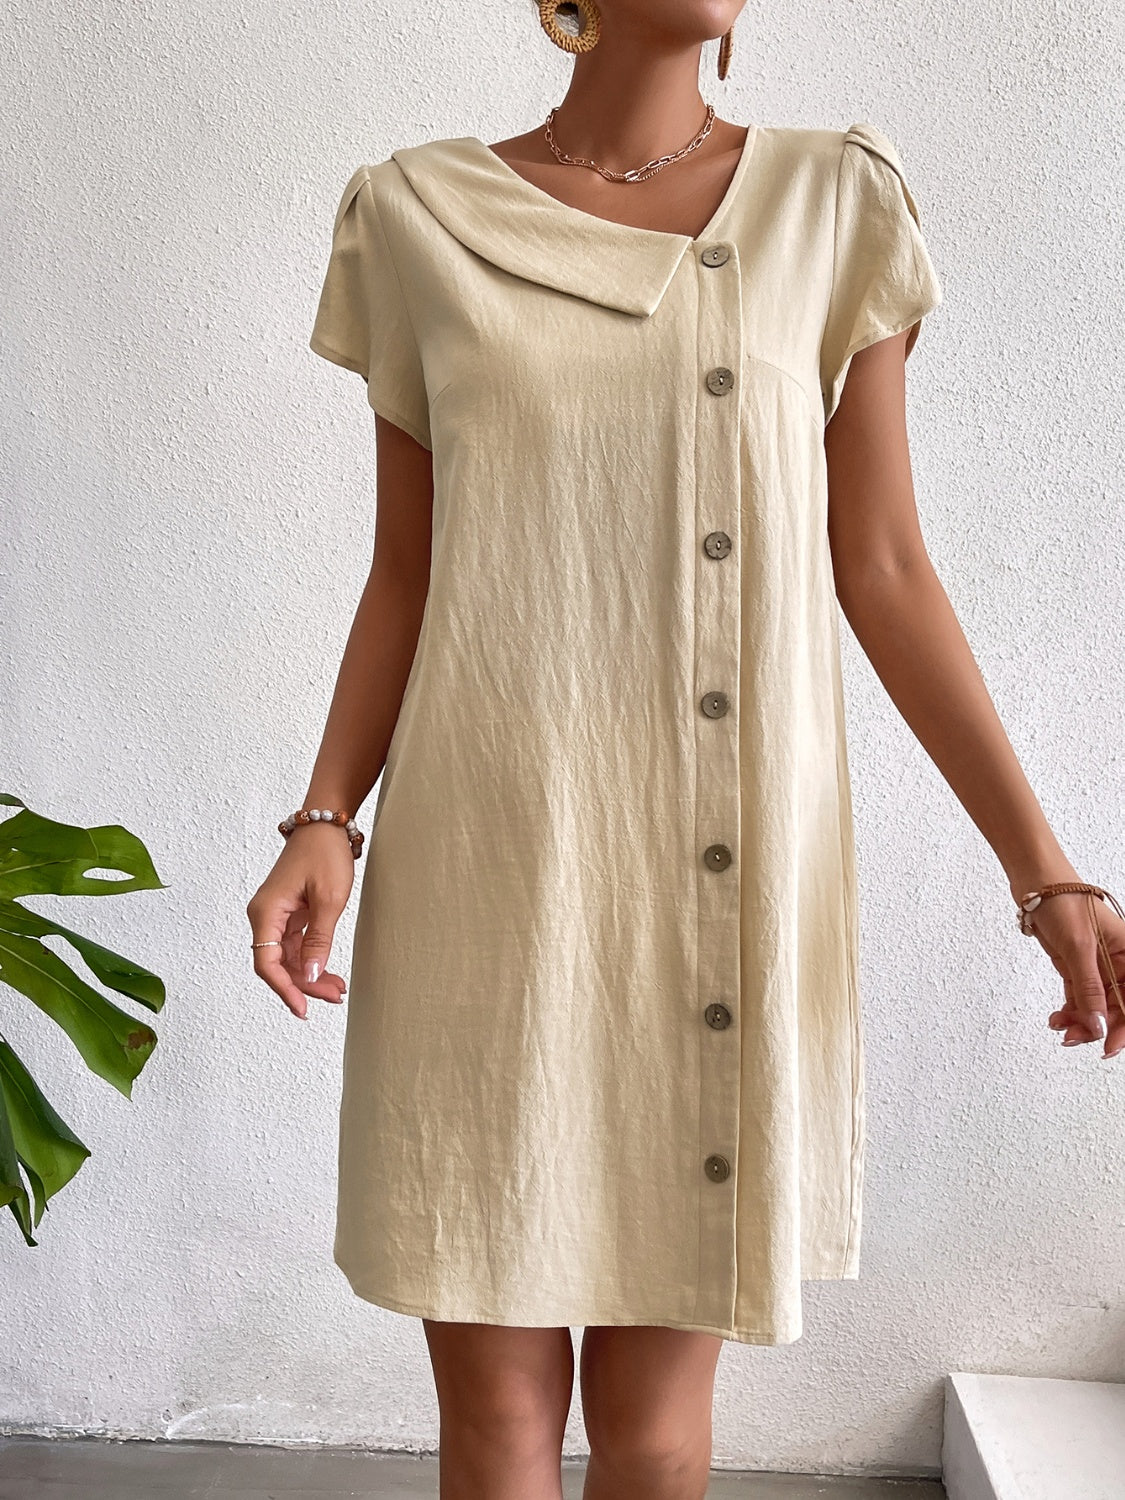 Asymmetrical Neck Short Sleeve Dress for Women Over 50, Perfect for Summer Beach Wedding Guest or Party Attire